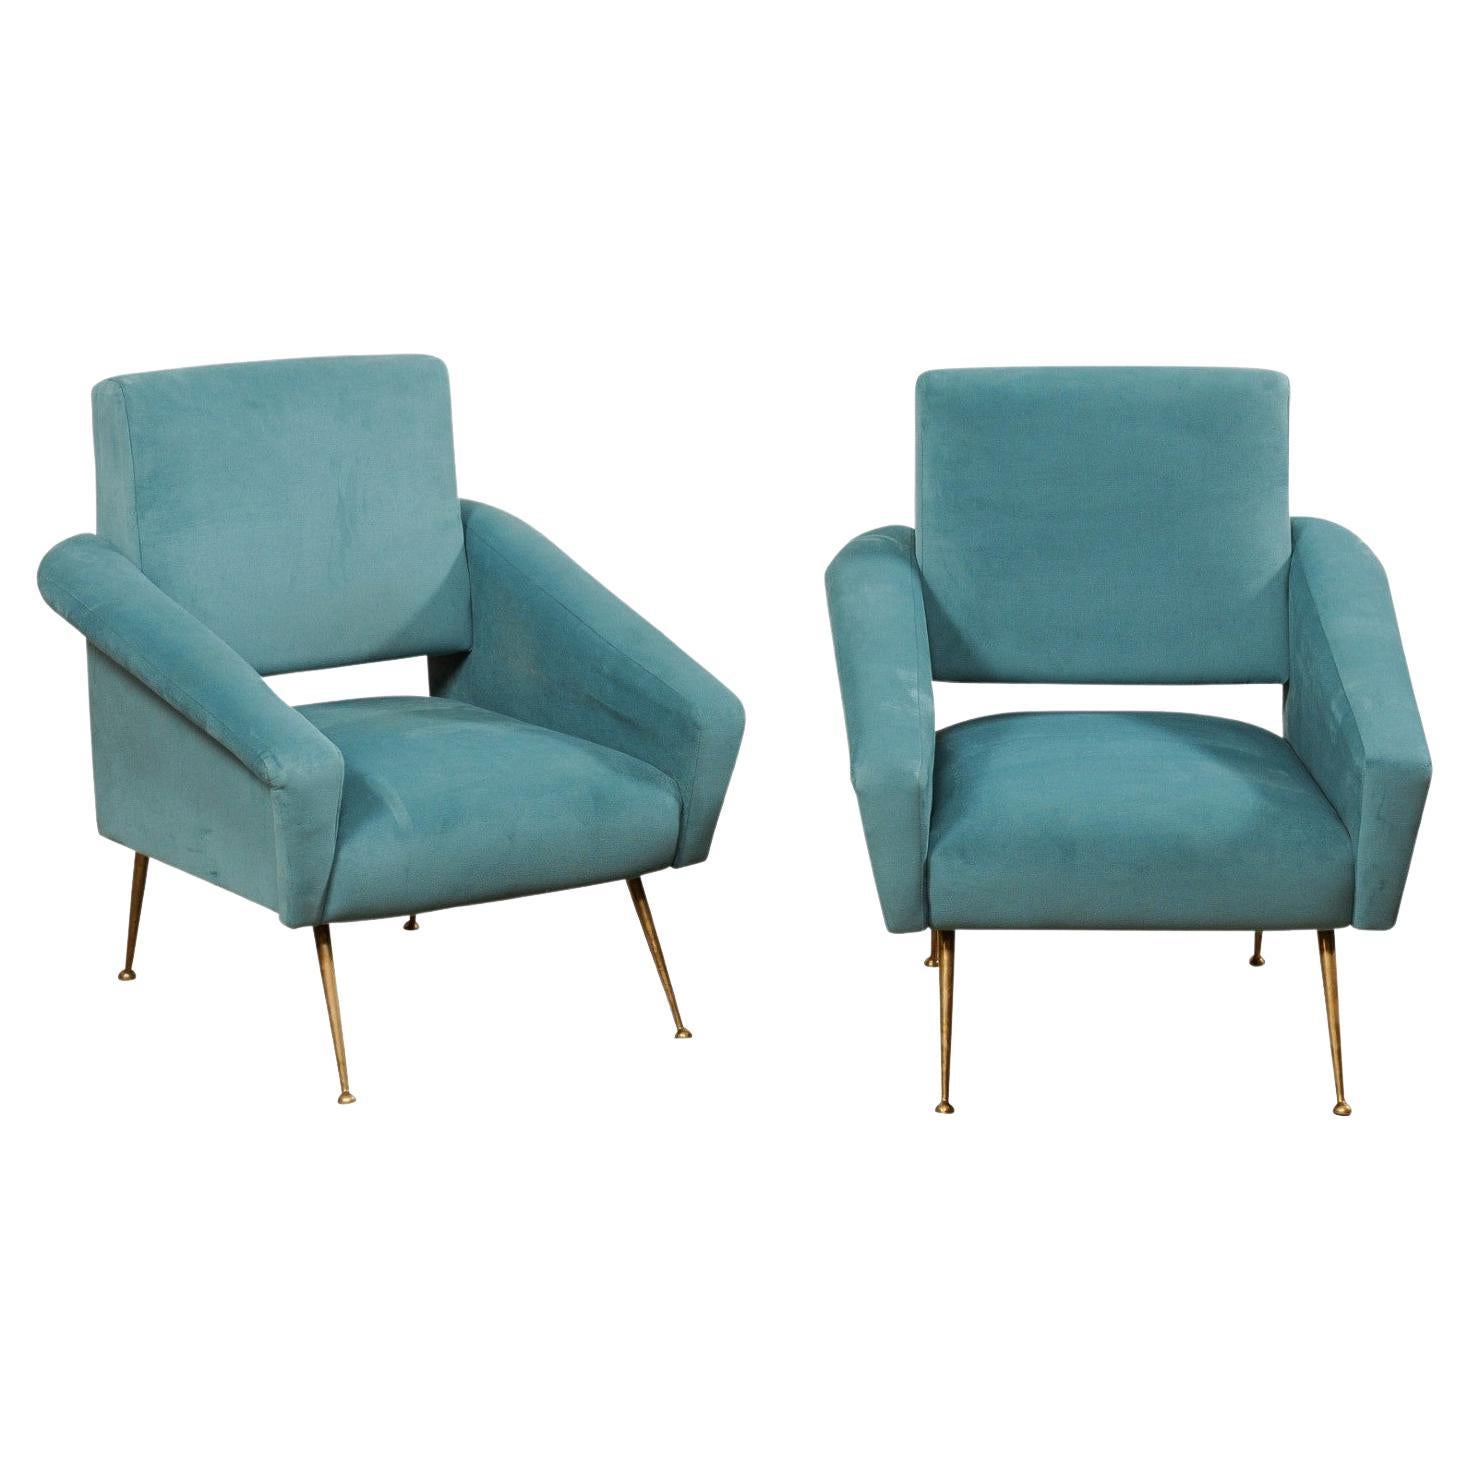 Italian Pair of Mid-Century Modern Upholstered Club Chairs For Sale